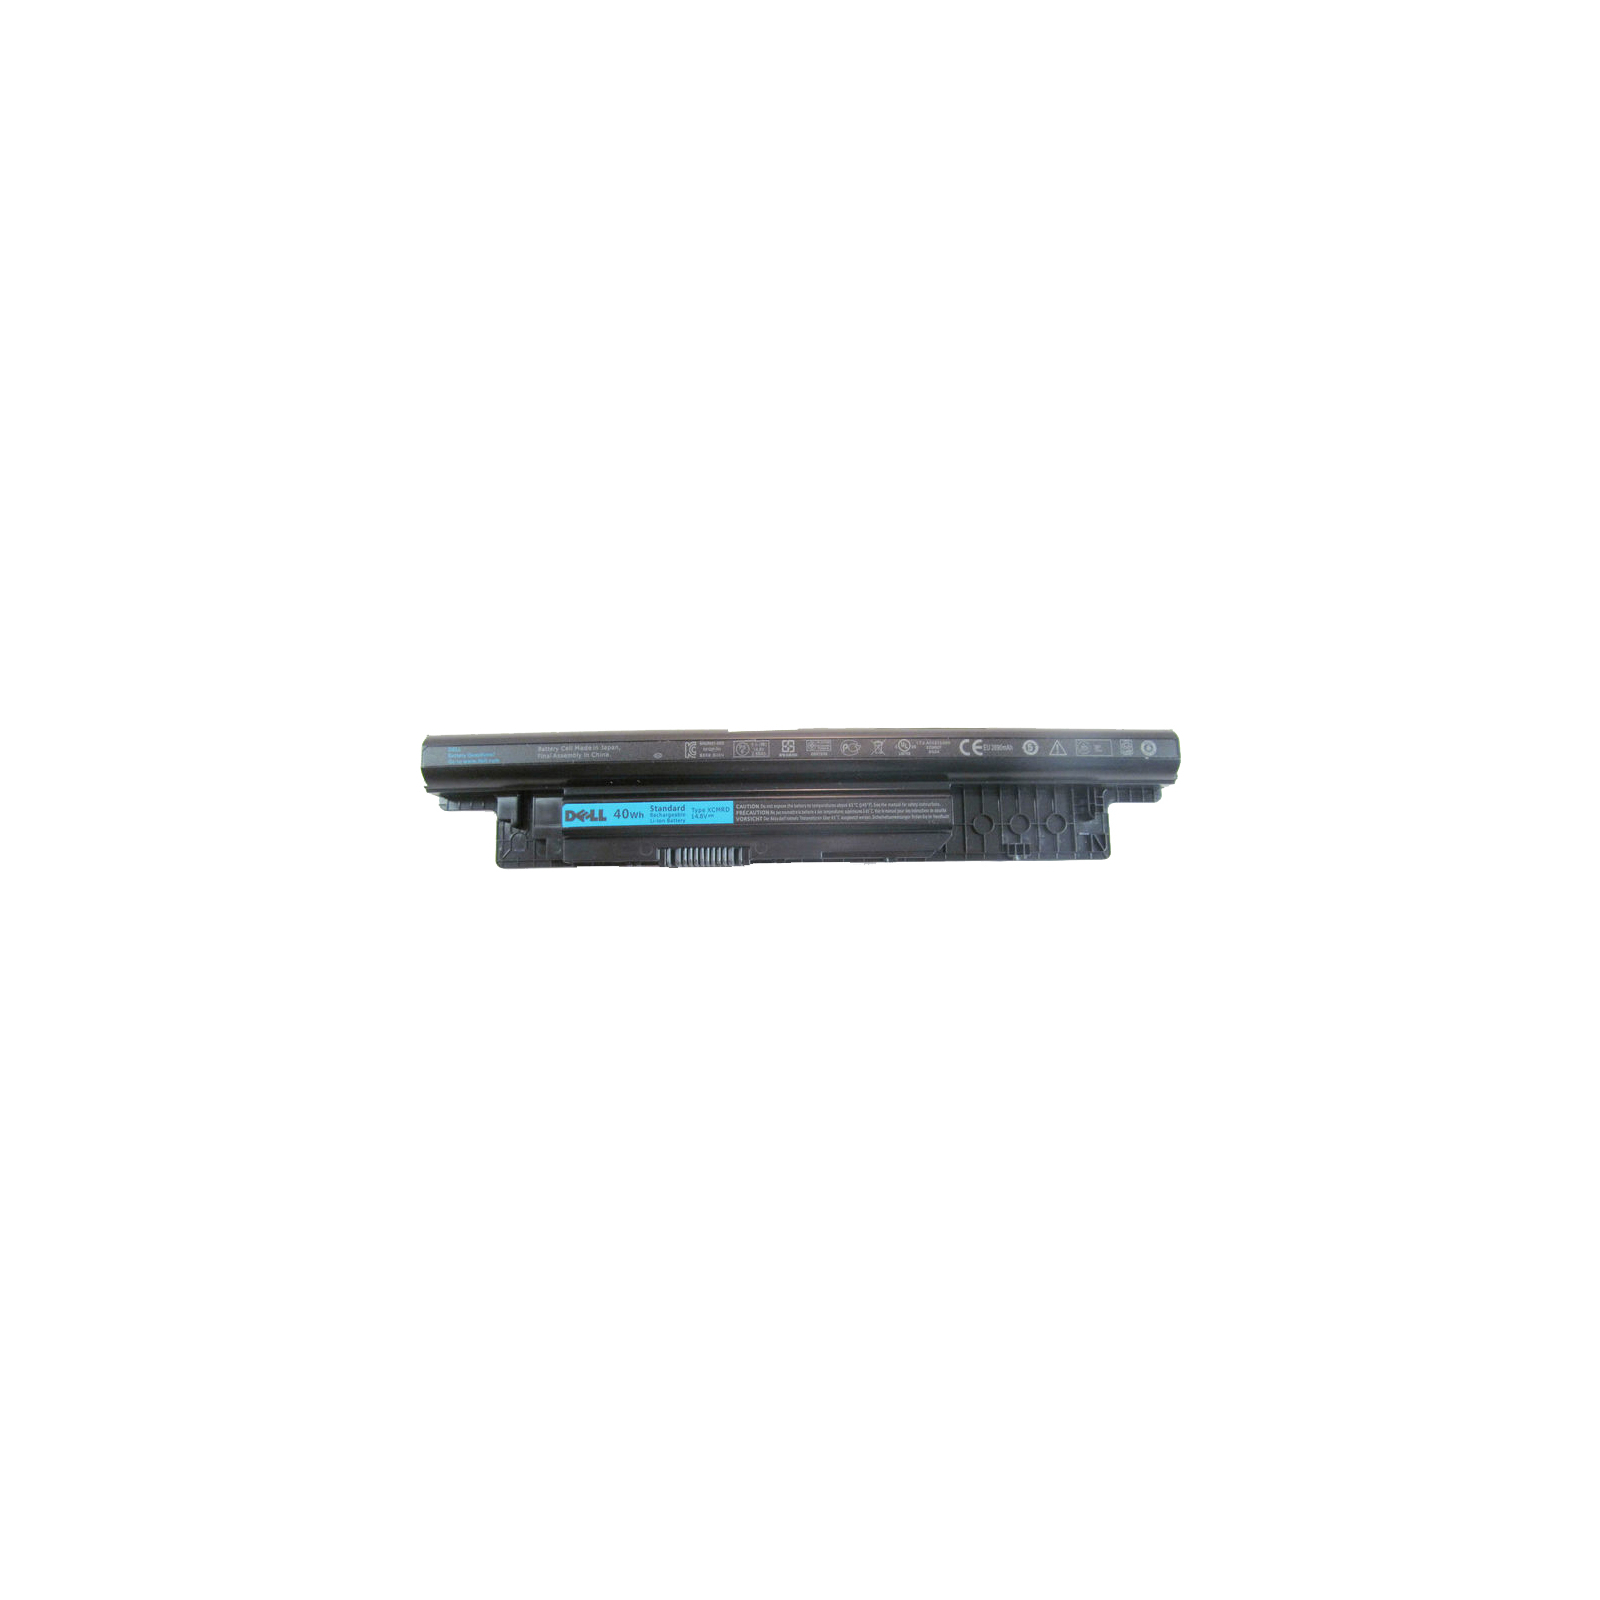 Акумулятор до ноутбука Dell Inspiron 15R-3521 XCMRD , 40Wh (2700mAh), 4cell, 14.8V (A41823)